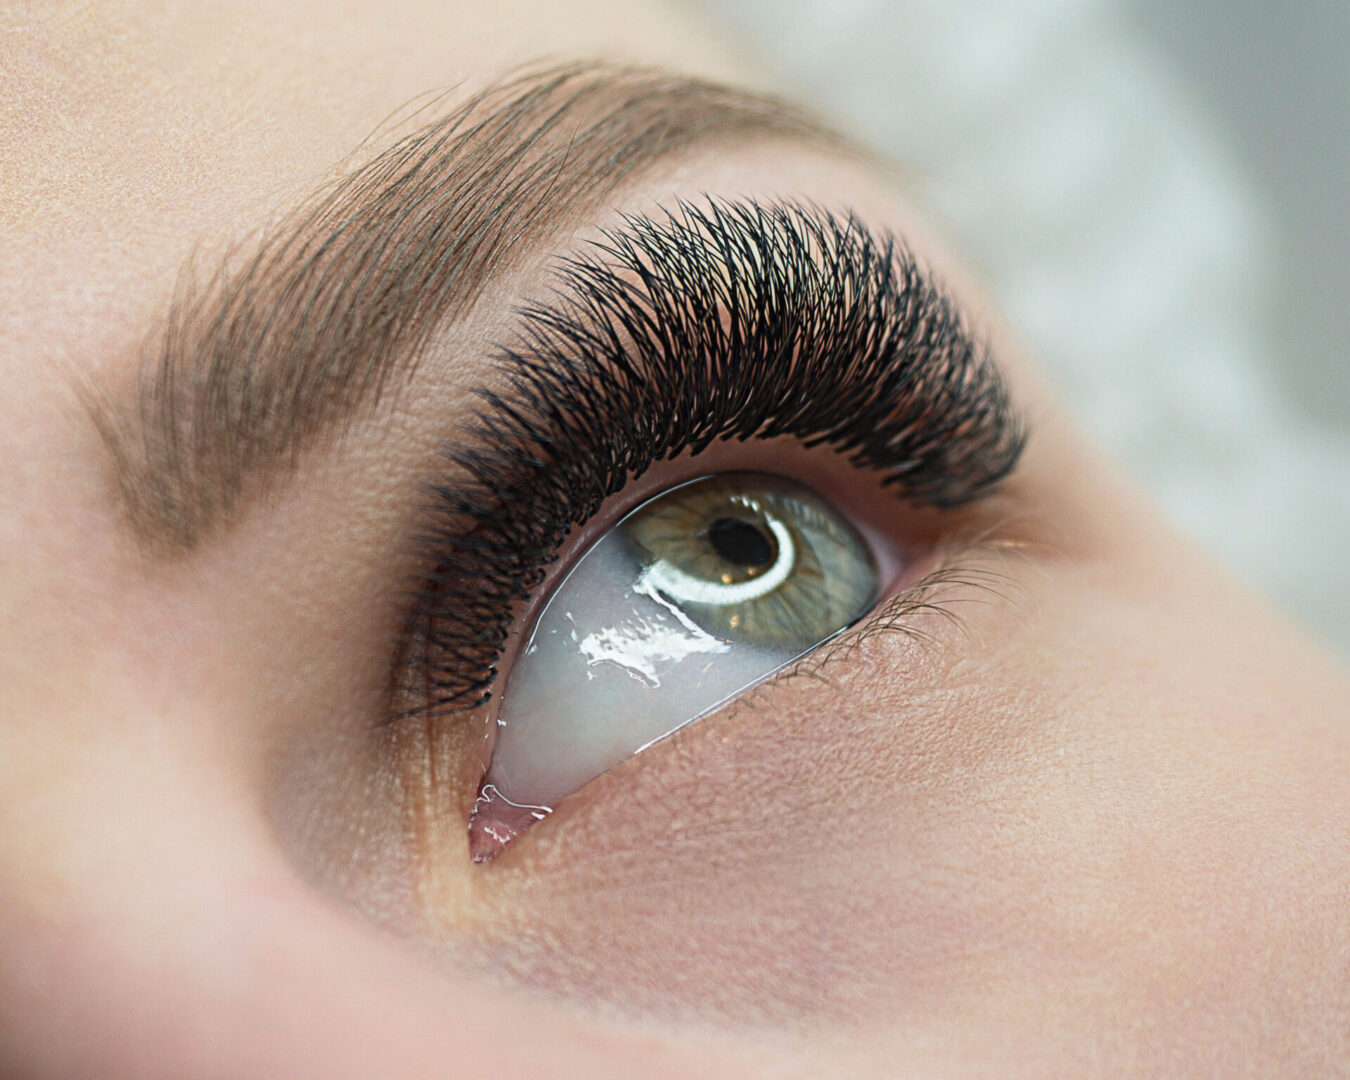 A close up of a person 's eye with long eyelashes